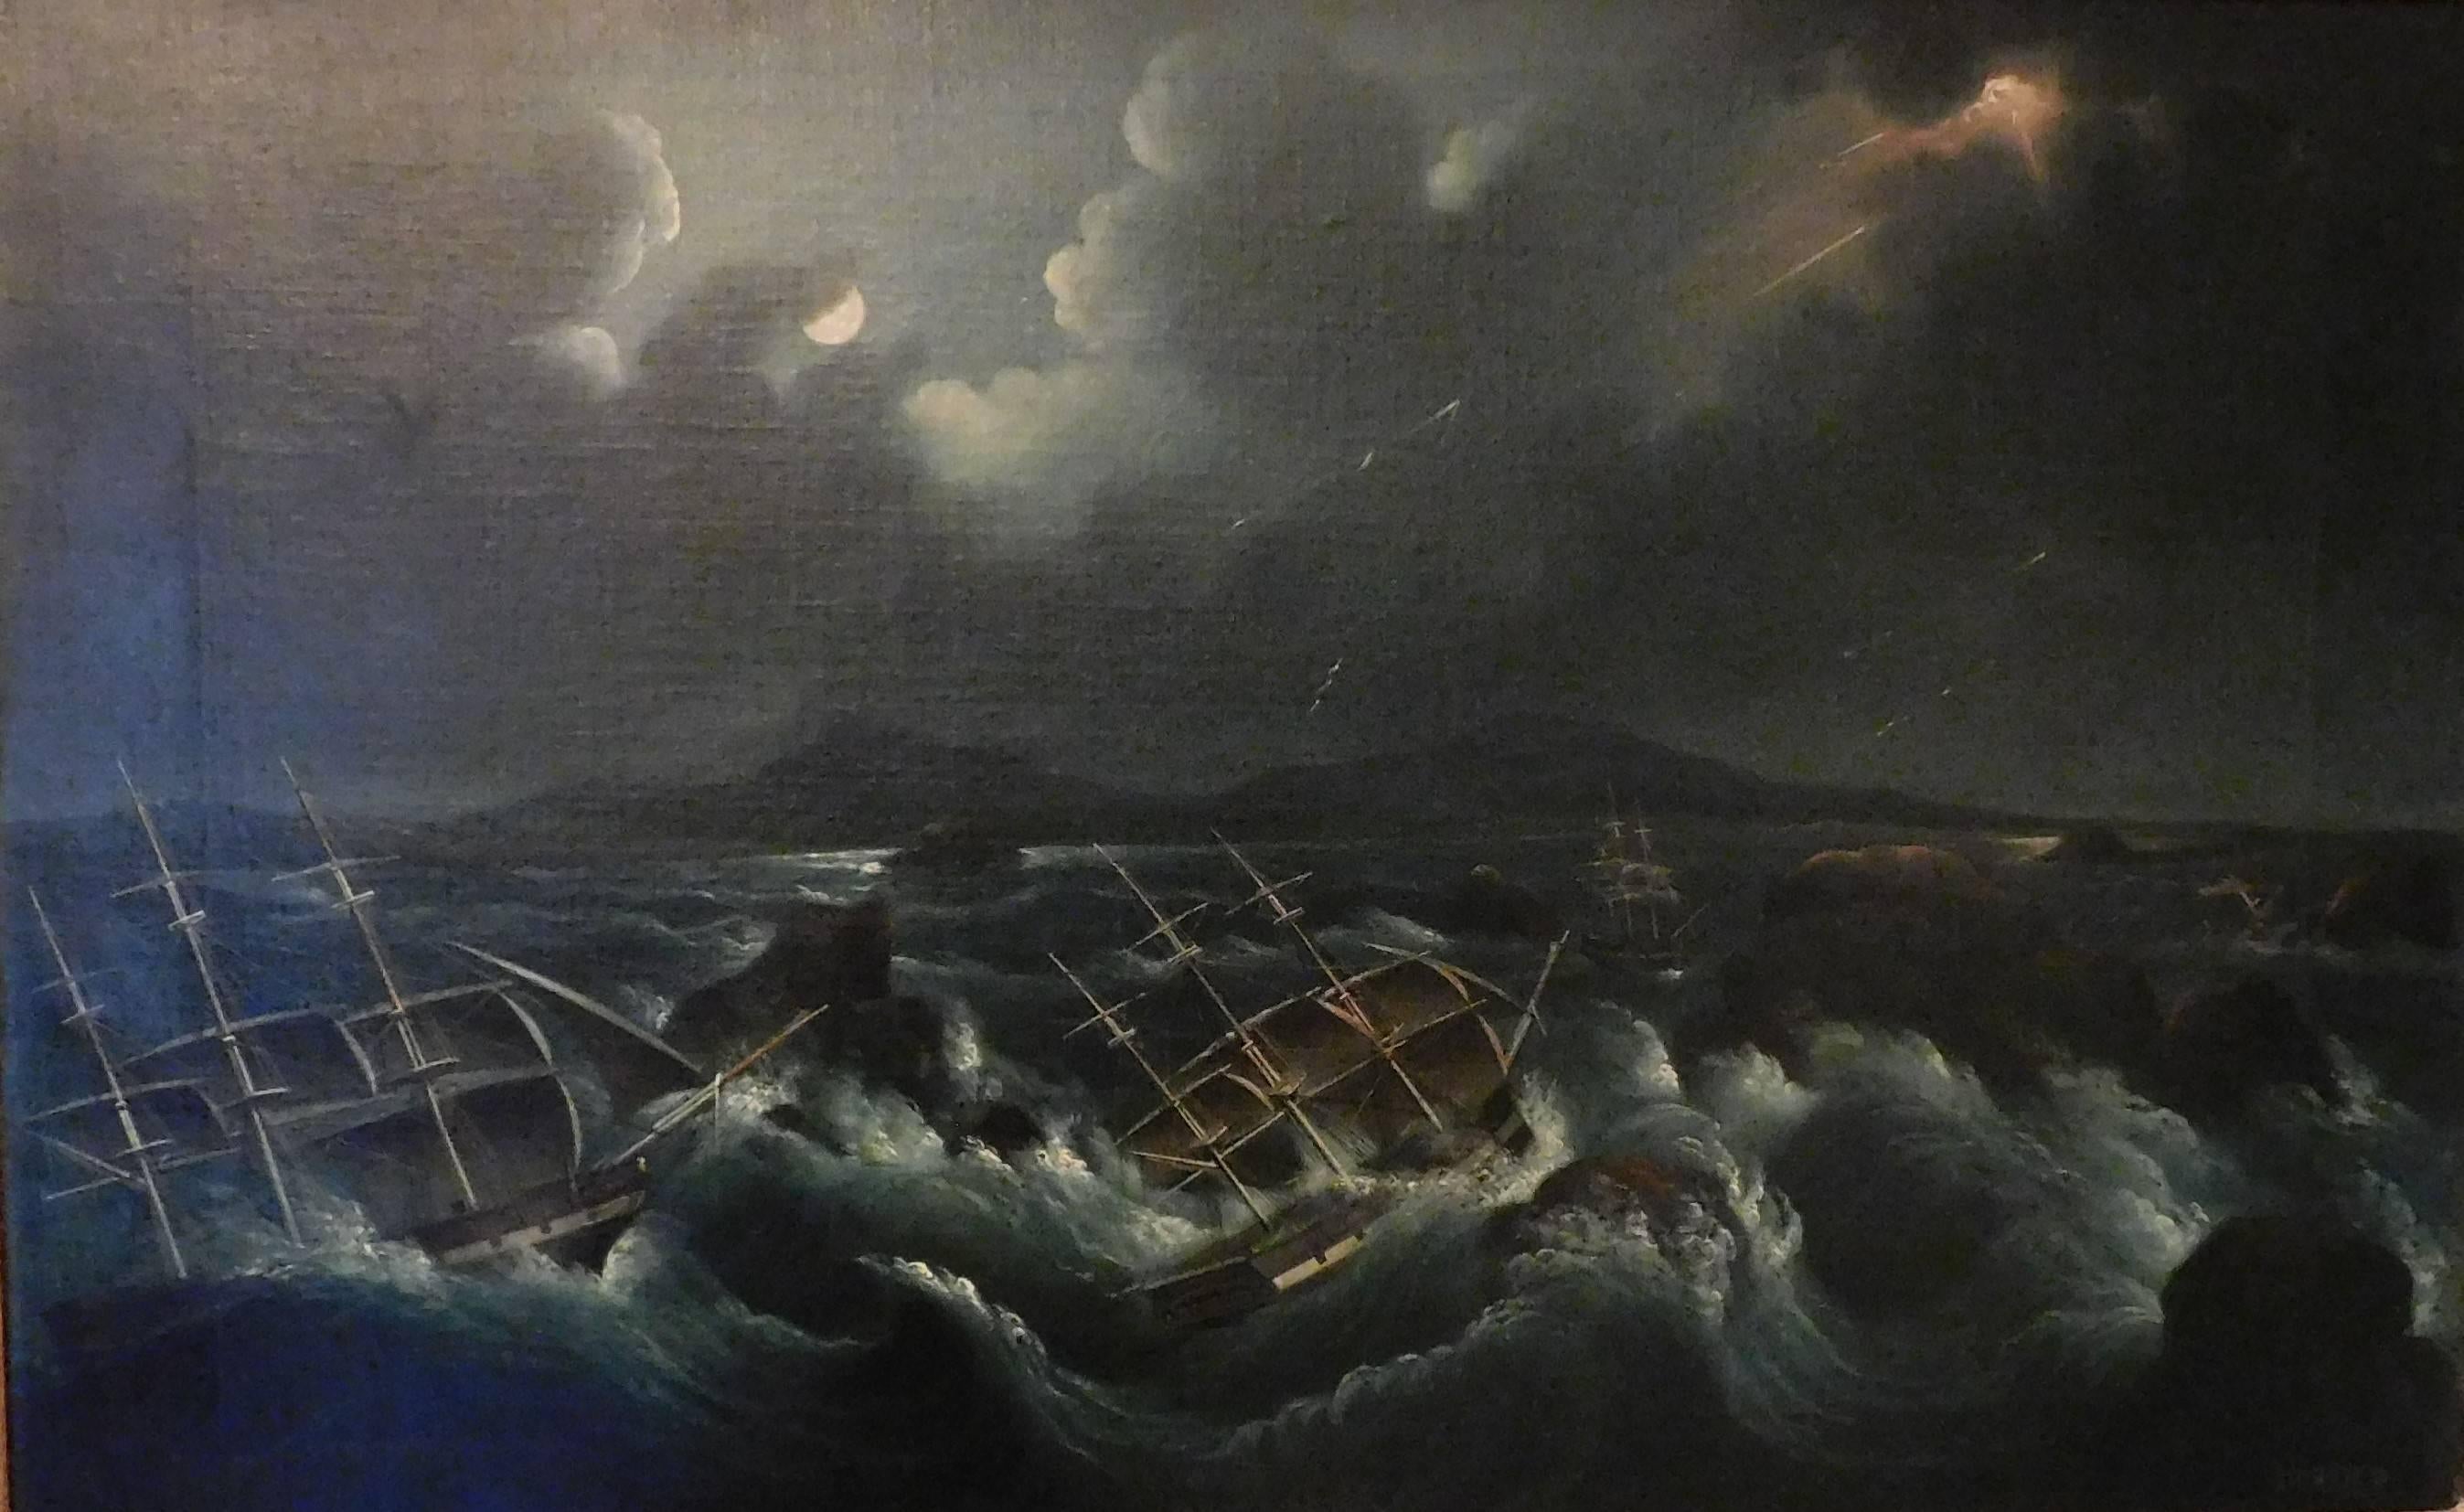 Thomas Horner (sometimes spelled Hornor) was born into the Quaker family of a grocer in Hull, England in 1785 and died in New York City in 1844. He was known in New York for allegorical paintings of ships in peril and moonlit scenes. The frame is